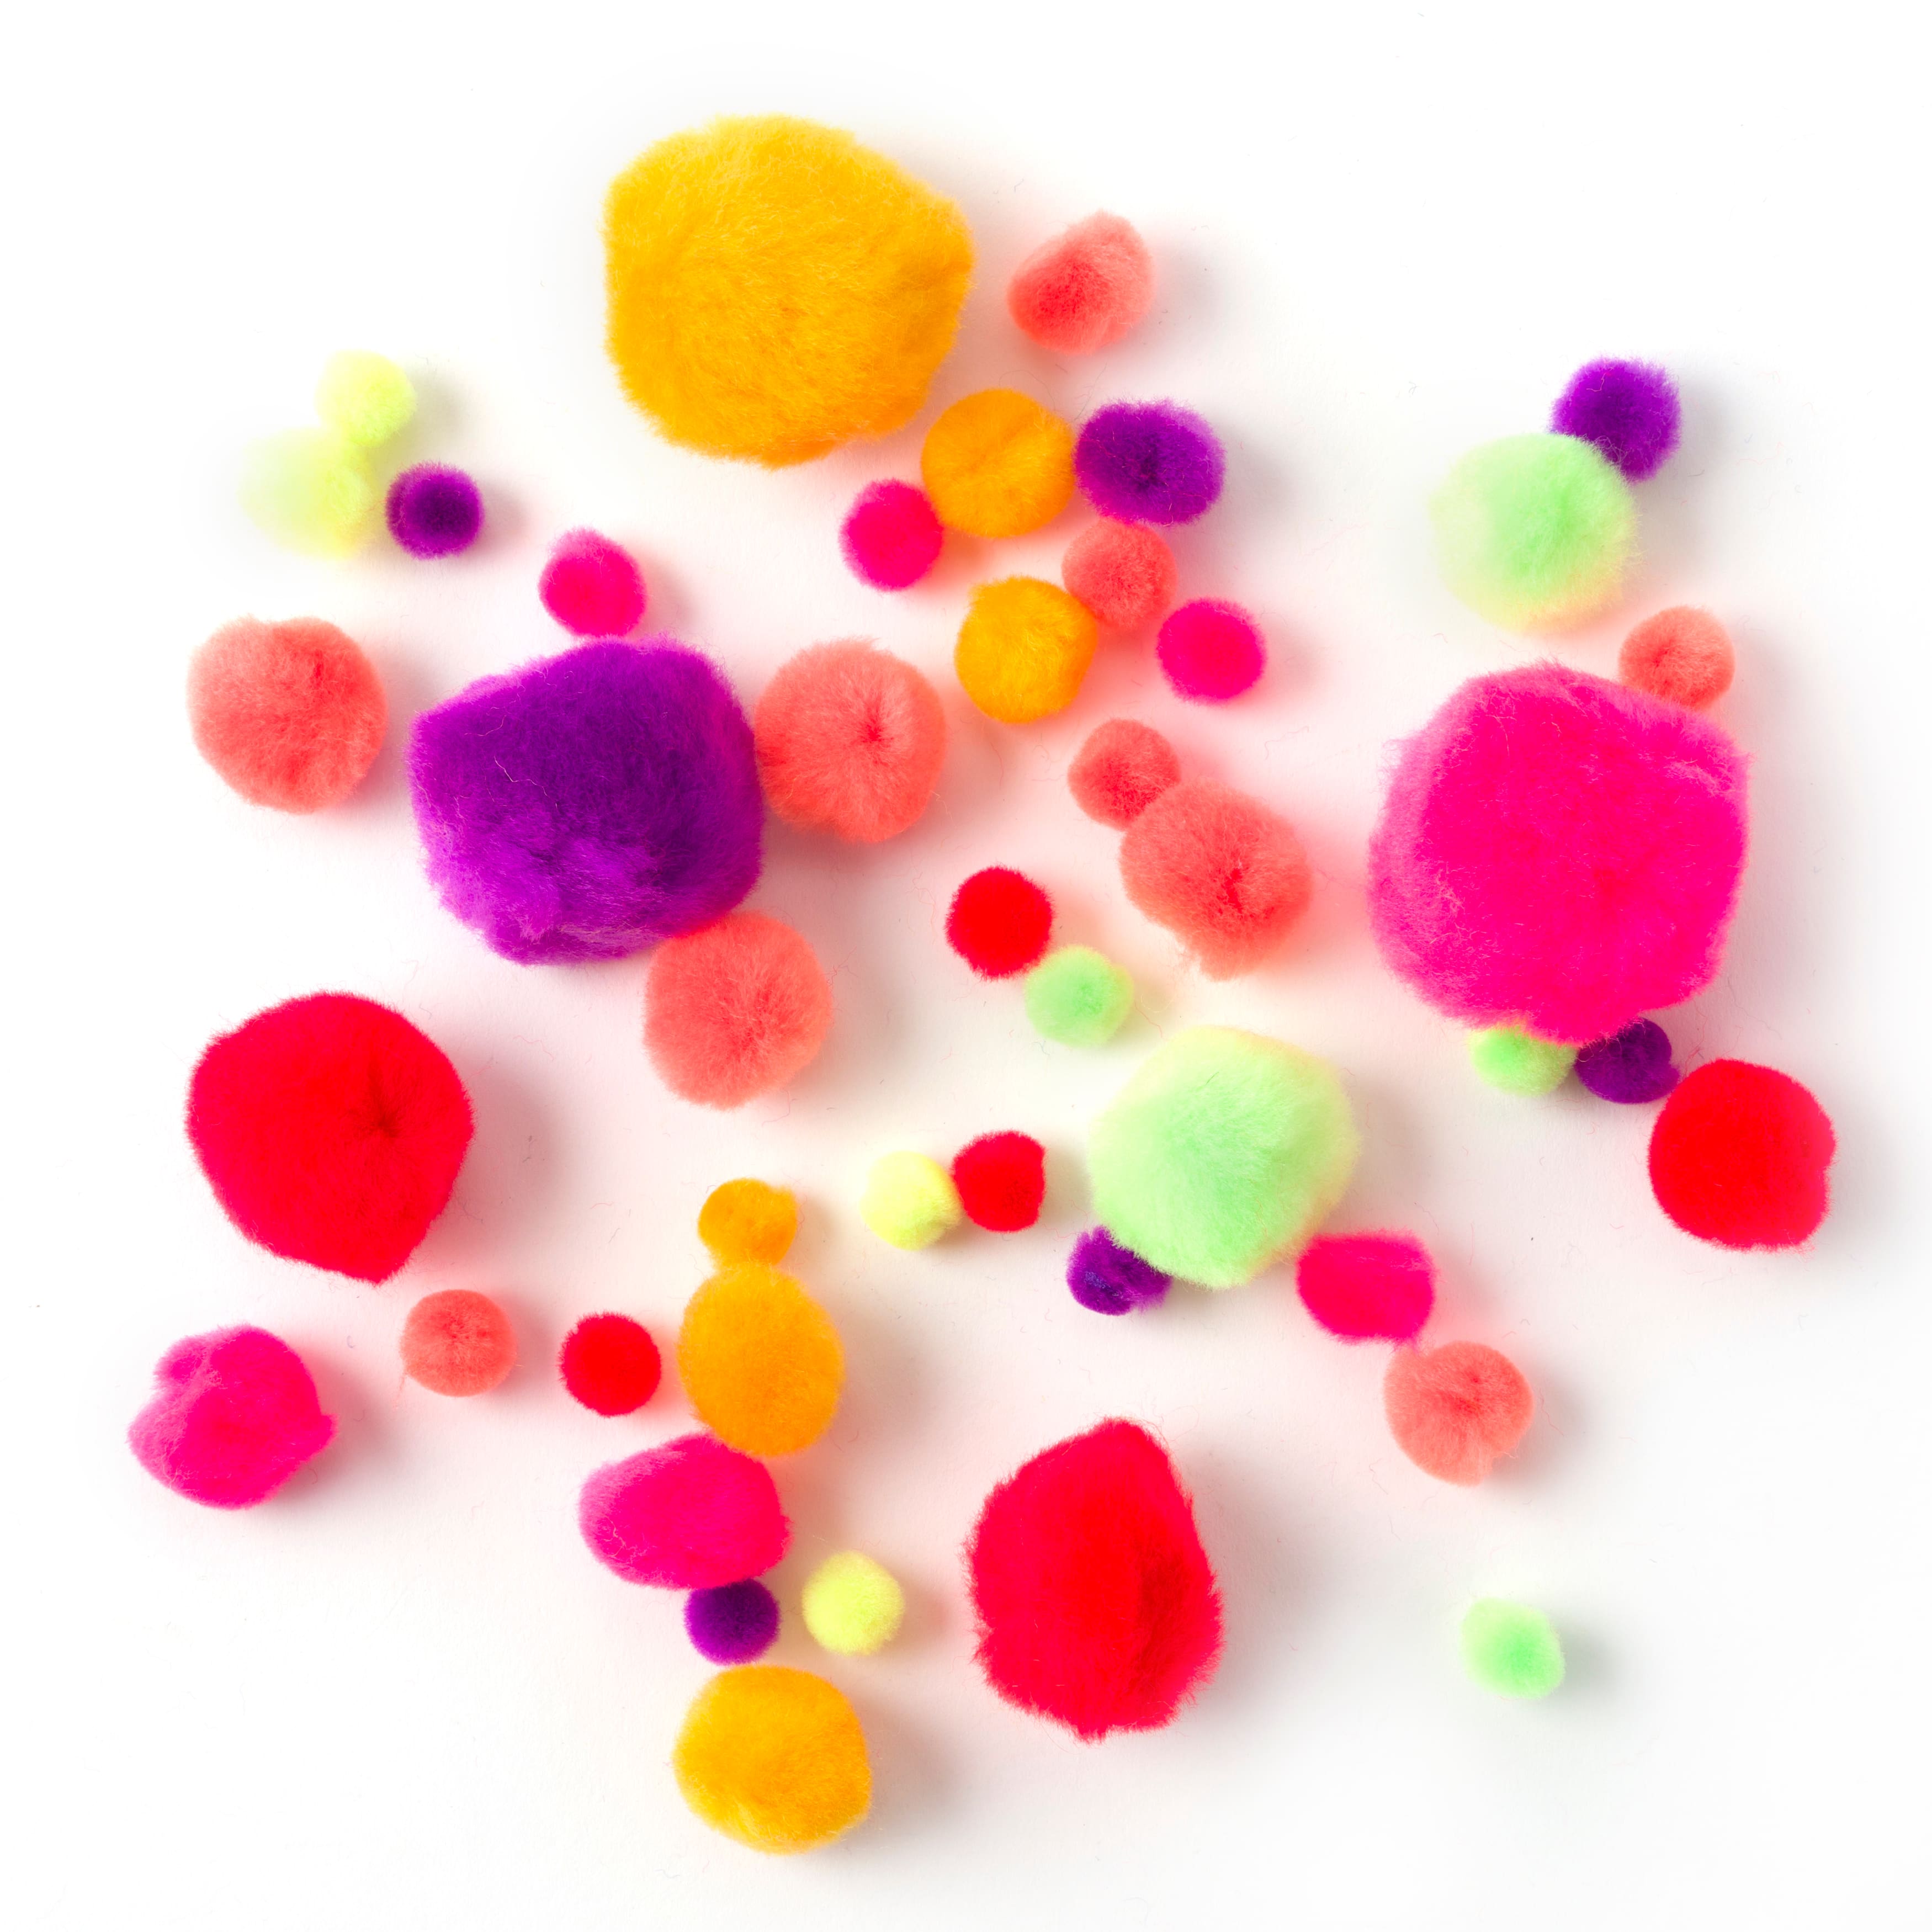 Hot Colors Mix Pom Poms by Creatology&#x2122;